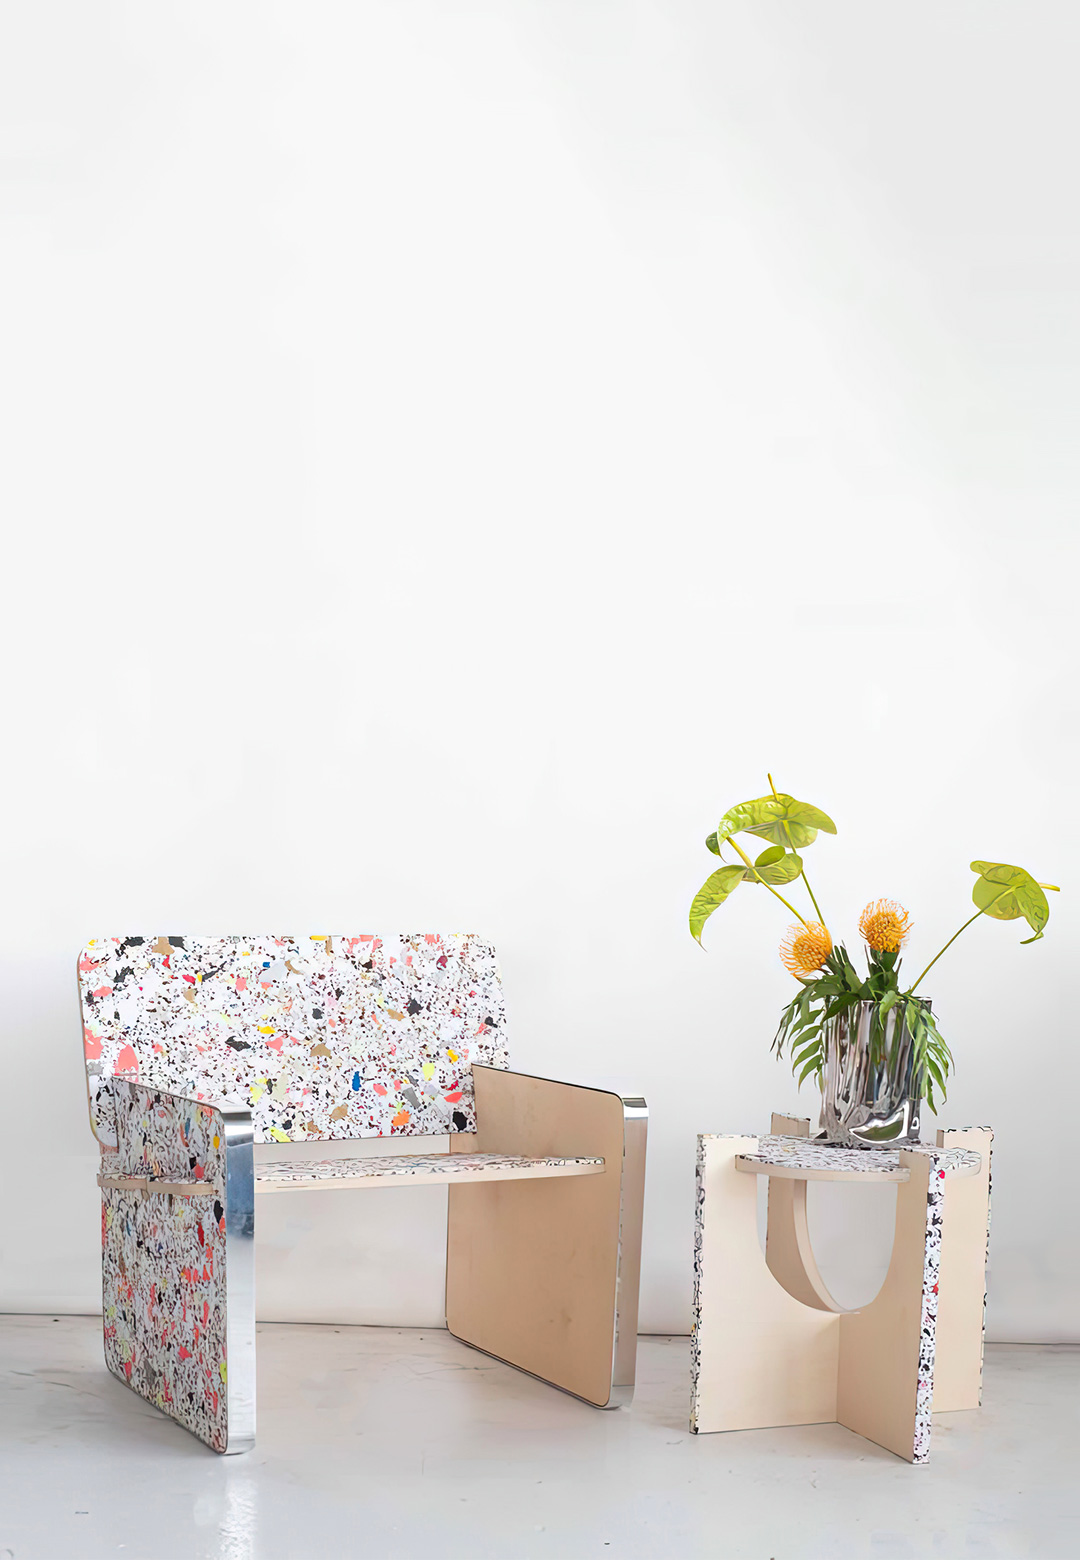 Particle's ‘Homewares Capsule Collection’ fuses sustainability and functionality